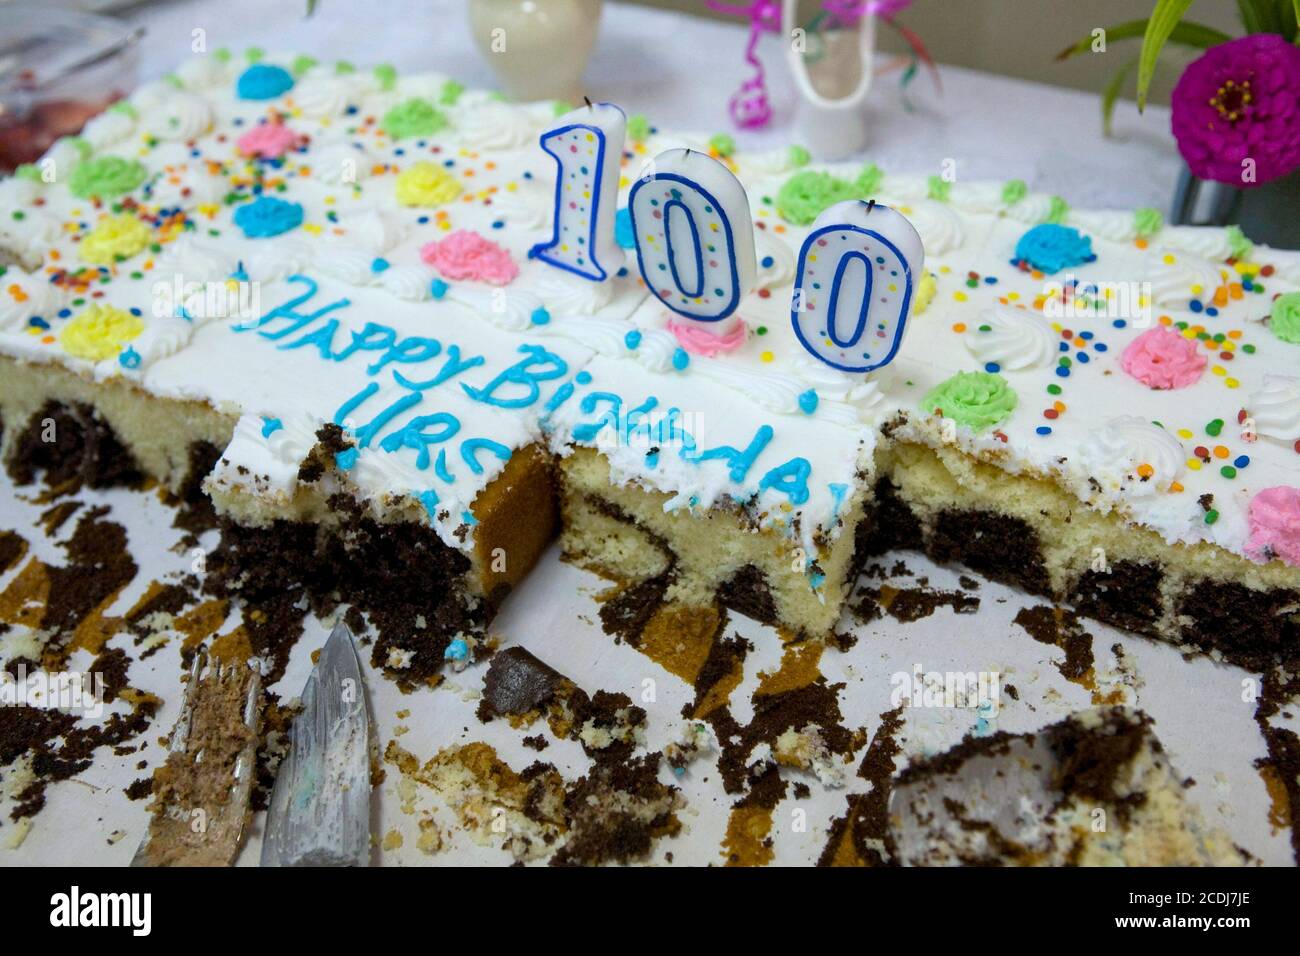 Burnet, TX September 16, 2007: Cake at Ursula Kramer's birthday party. She was born September 16, 1907 in rural Germany and fled Germany under Hitler in her early 30's and emigrated to Texas before World War II. She was driving up until her 99th birthday. ©Bob Daemmrich Stock Photo